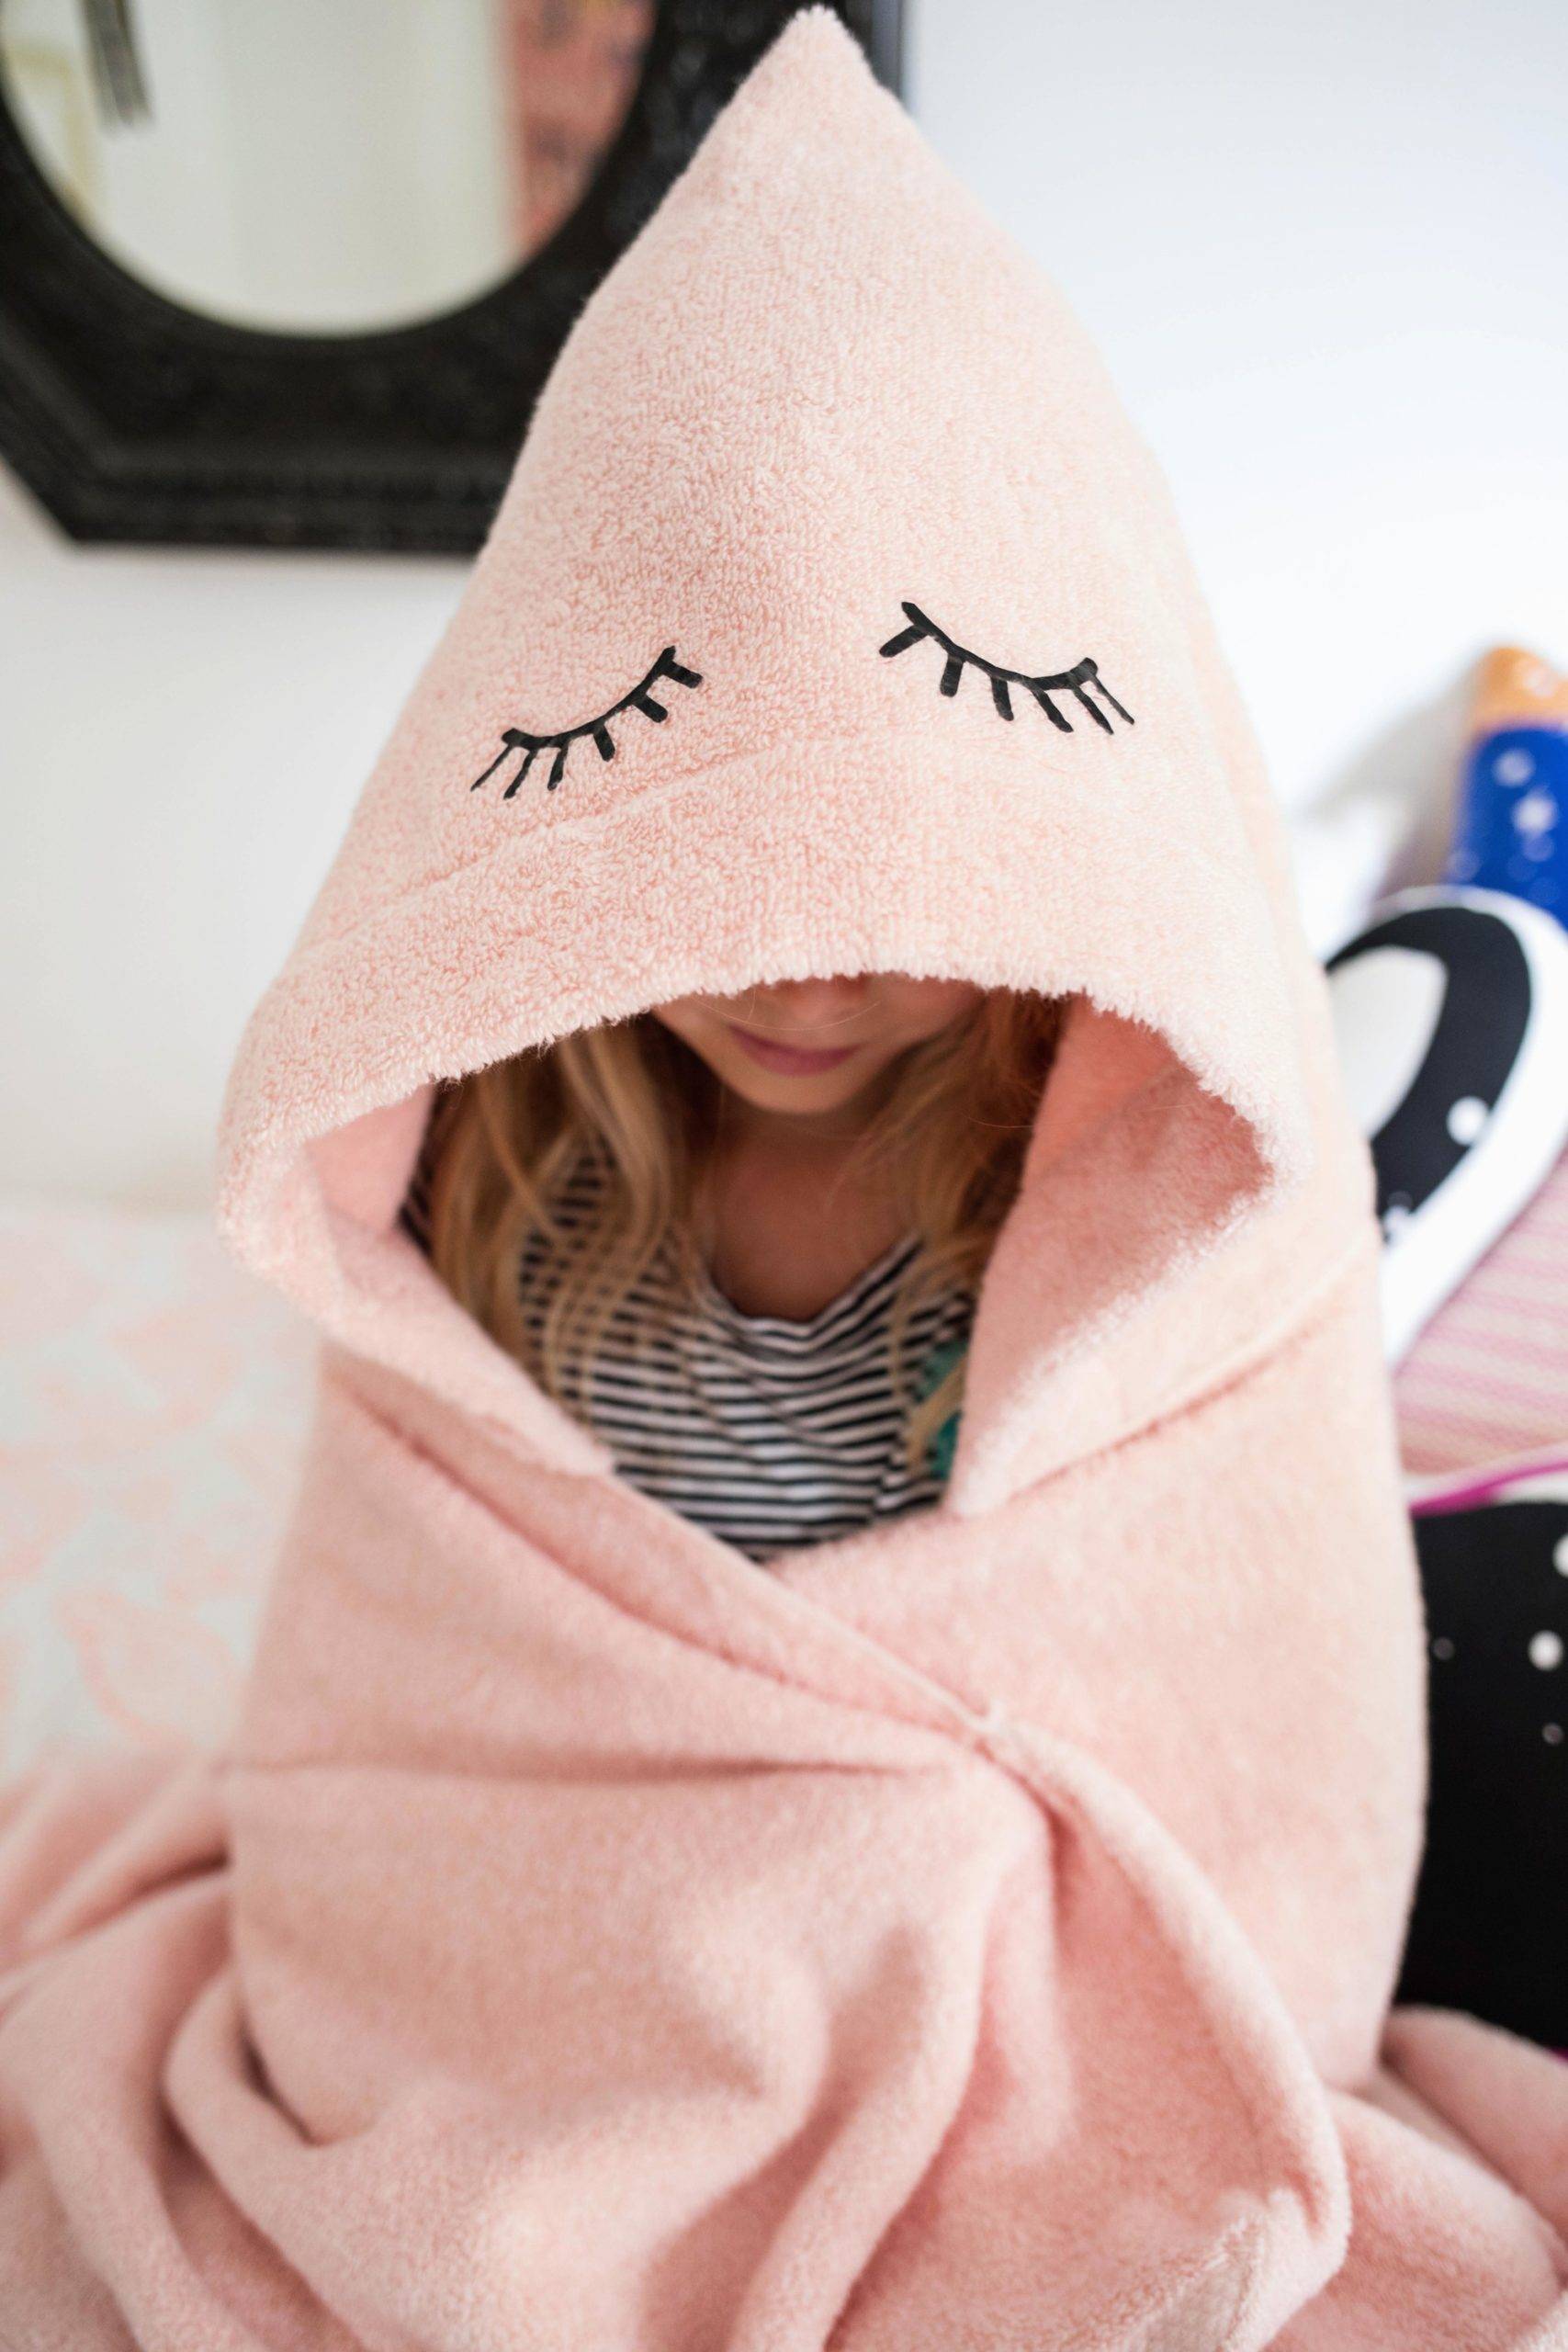 A girl is wrapped up in a pink towel with eyelashes on it.